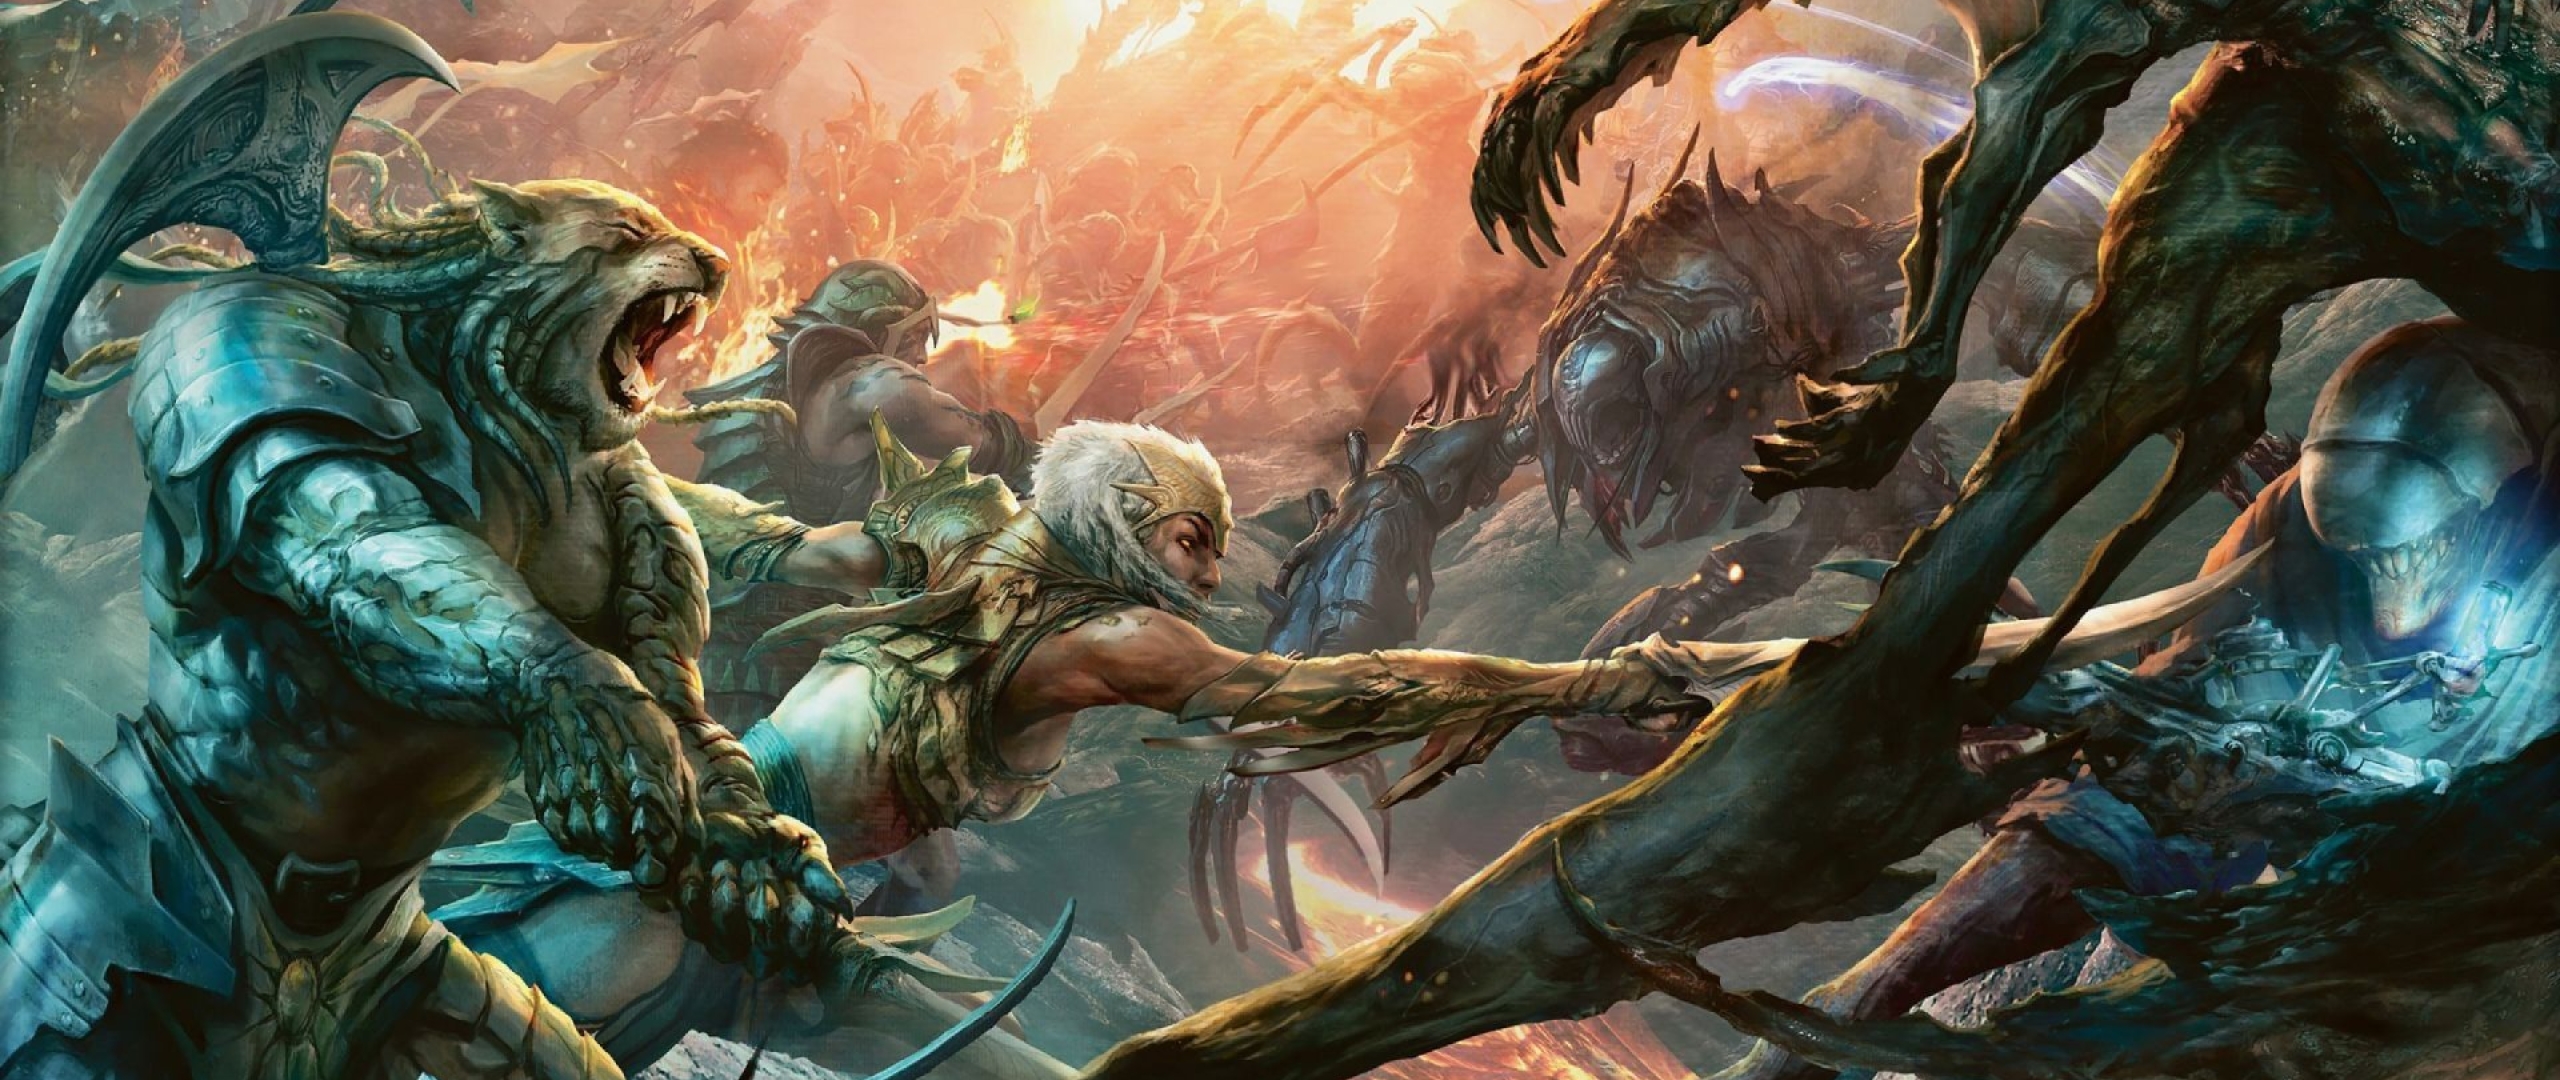 2560x1080 Magic The Gathering Mtg Magic 2560x1080 Resolution Wallpaper Hd Games 4k Wallpapers Images Photos And Background Wallpapers Den